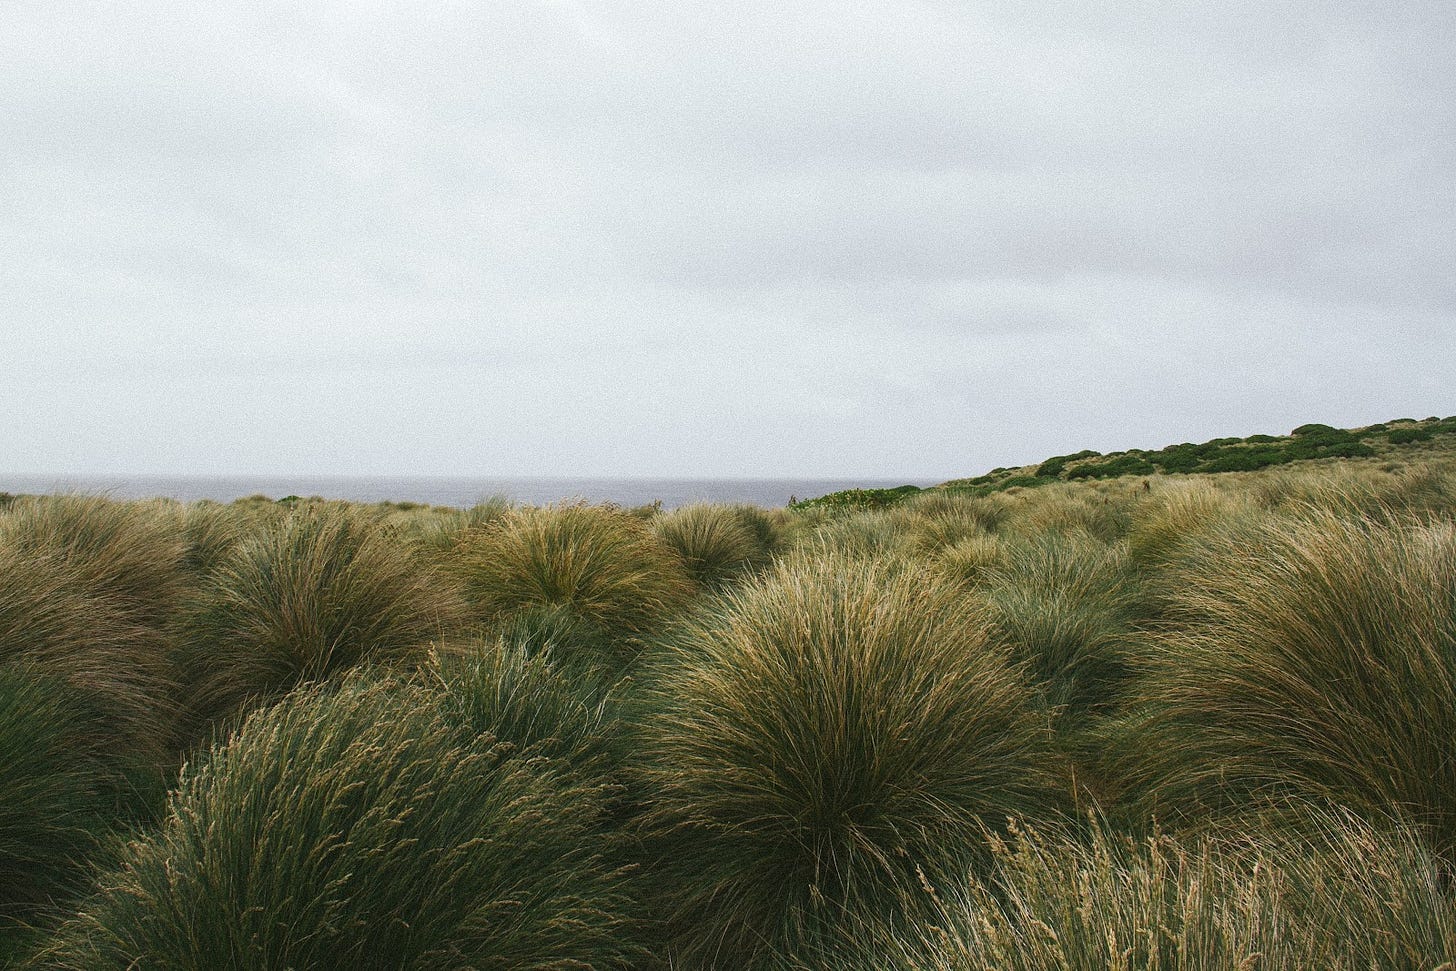 A photograph of large tussock grasses which almost reach up to the horizon line, but a small sliver of ocean is visible in the distance.